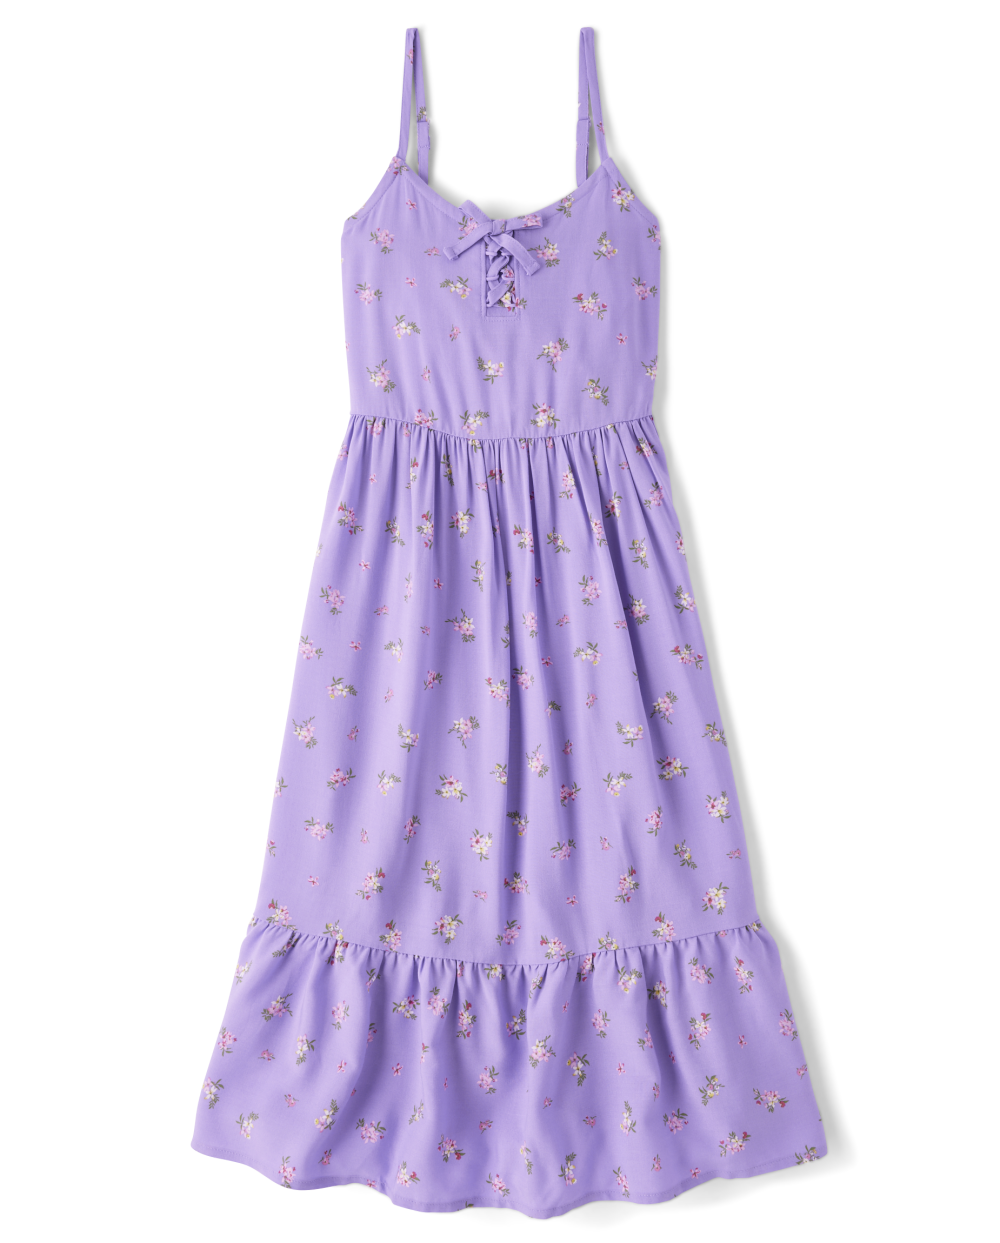 Girls V-neck Rayon Lace-Up Floral Print Smocked Sleeveless Maxi Dress With a Bow(s) and Ruffles